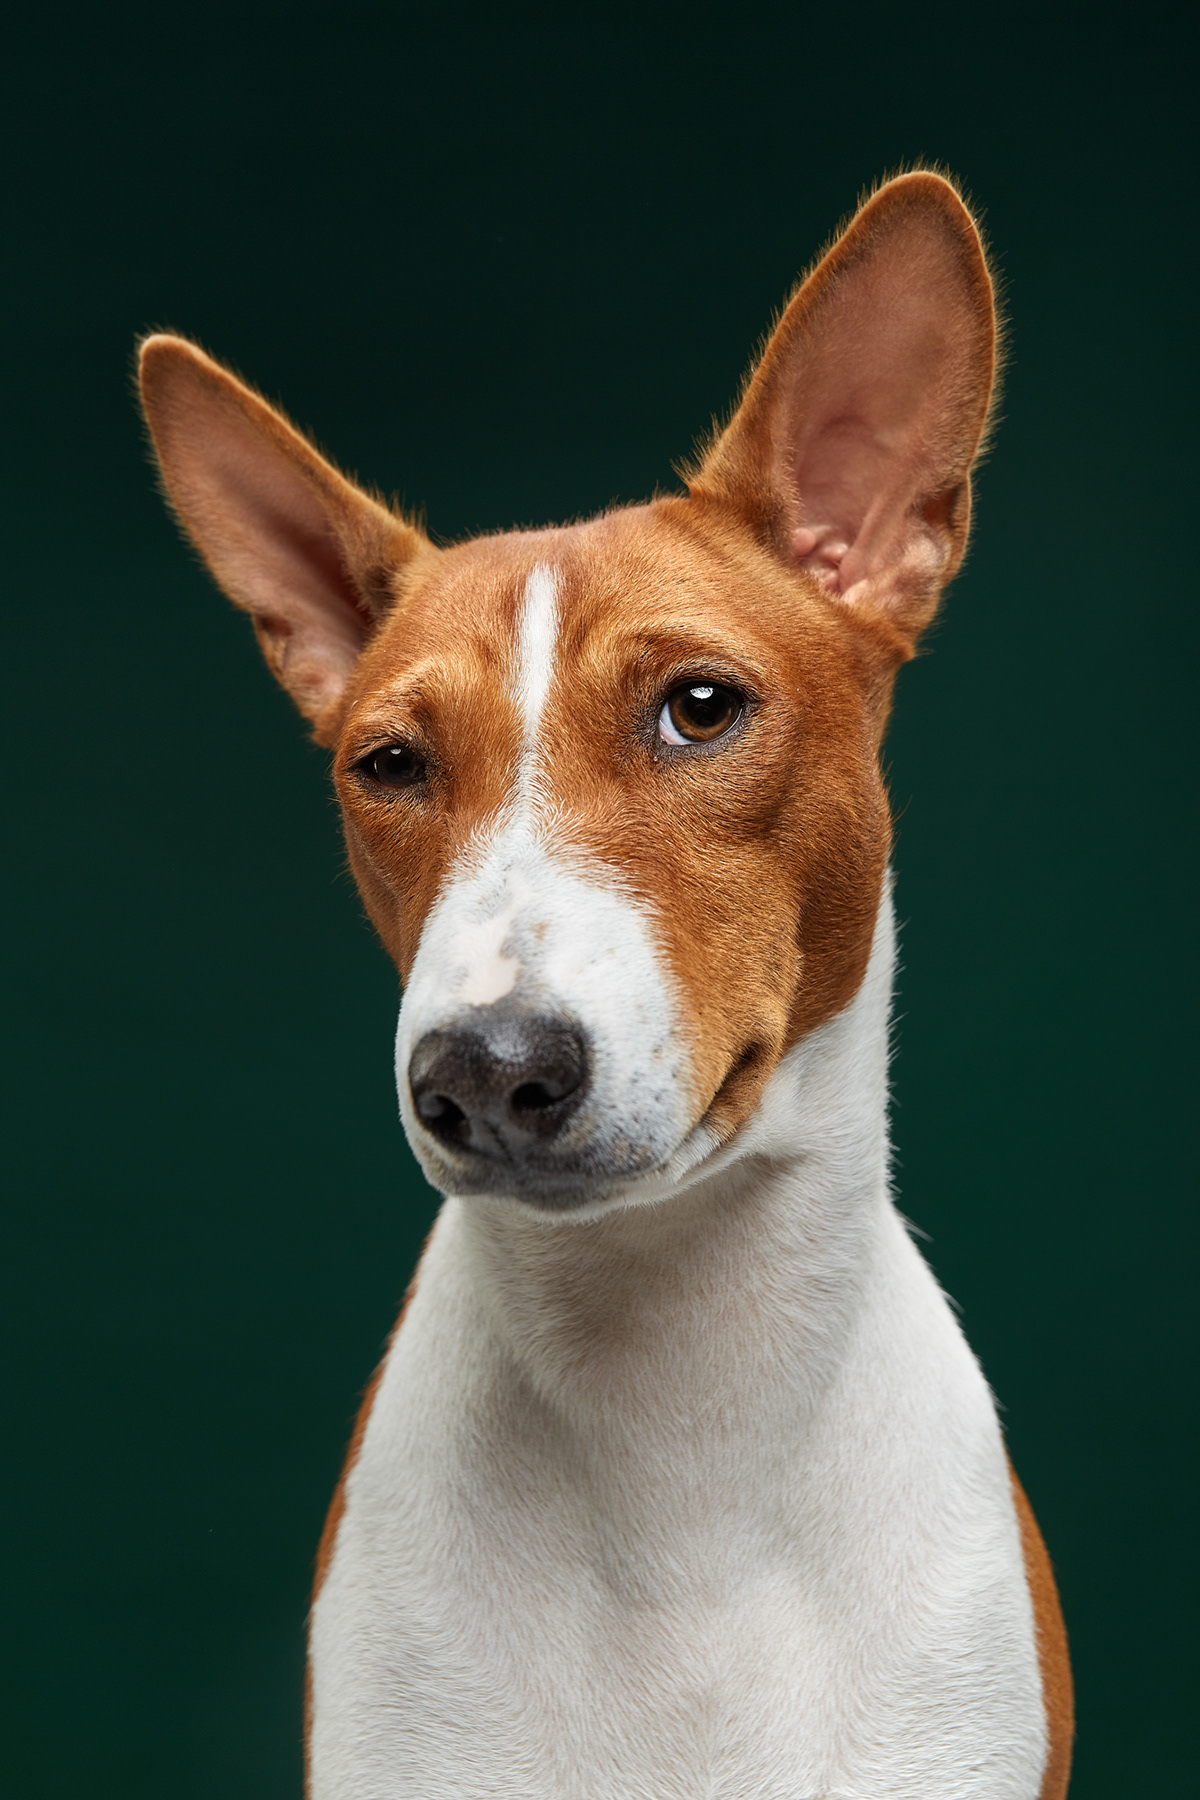 Portrait picture of a hound dog used for a dog show advertisement.